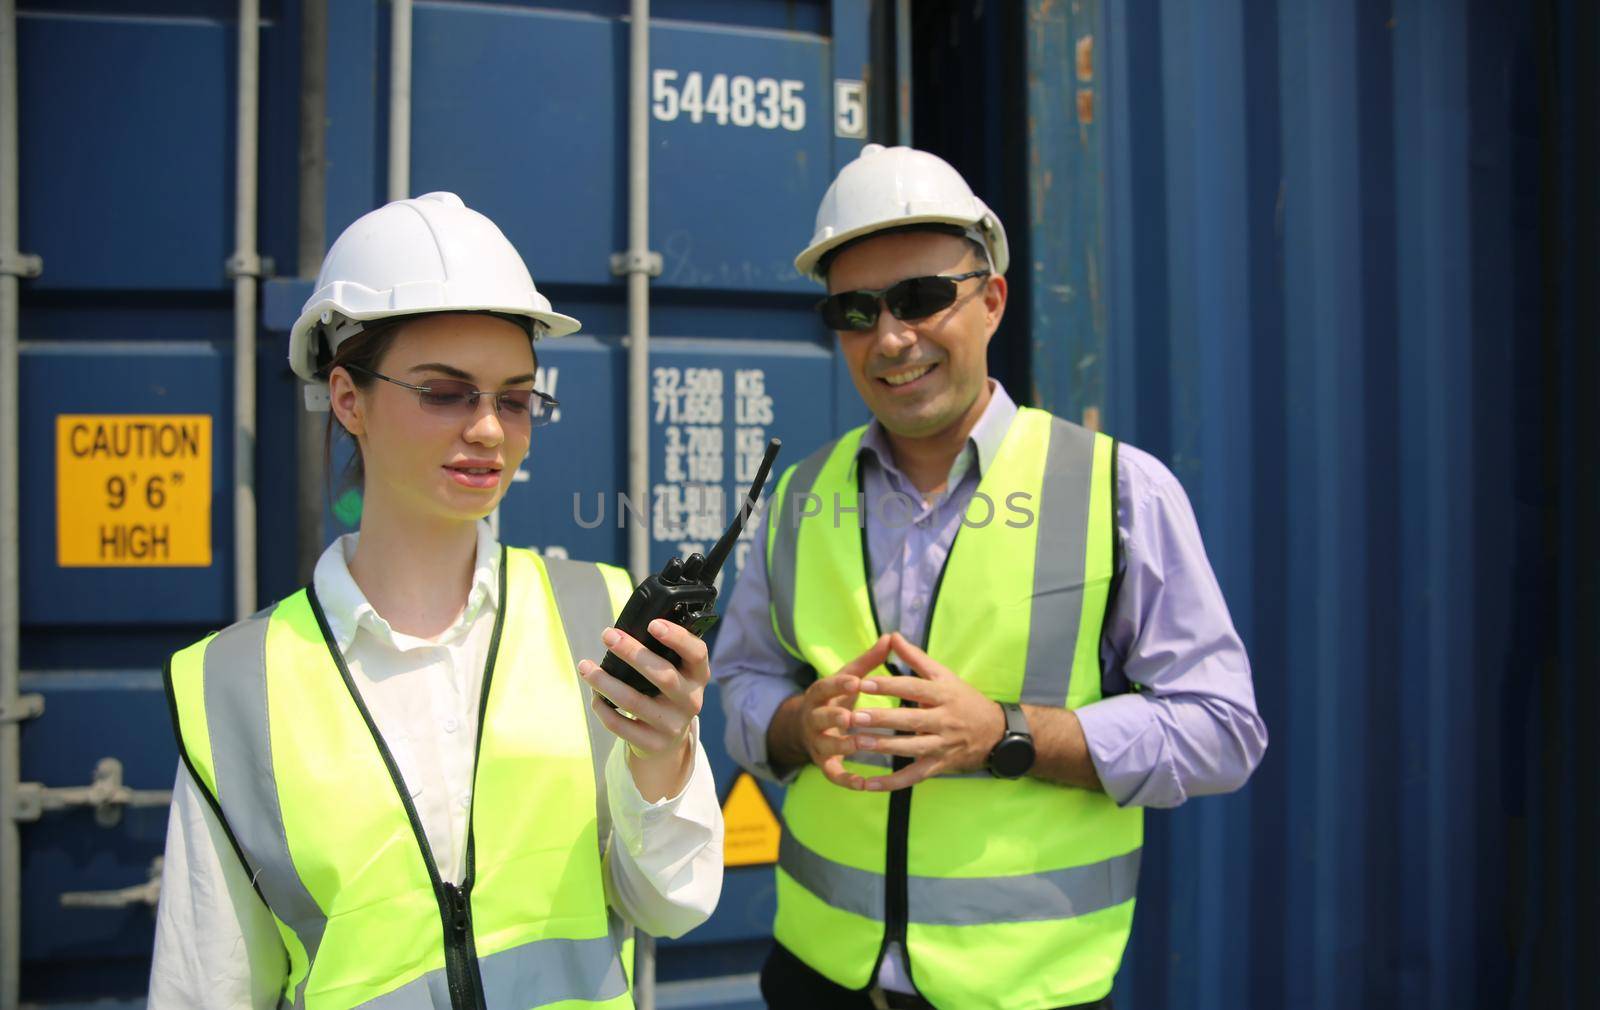 Manager and dock worker under discussion about dock container shipping warehouse document, they wearing safety uniform hard hat ,face mask and hold radio communication. by chuanchai